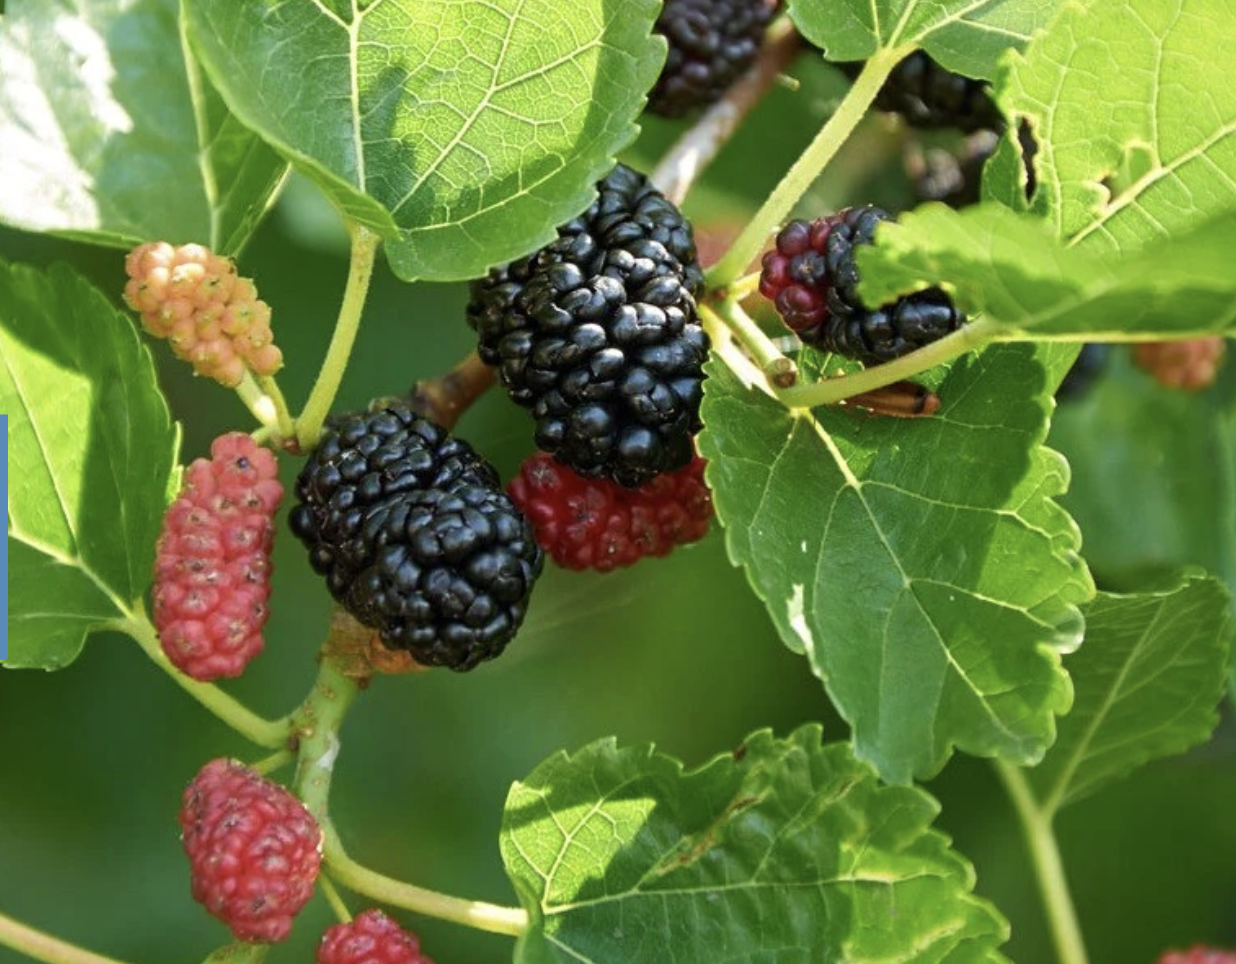 Dwarf Everbearing Mulberry Tree with ripe and unripened berries.